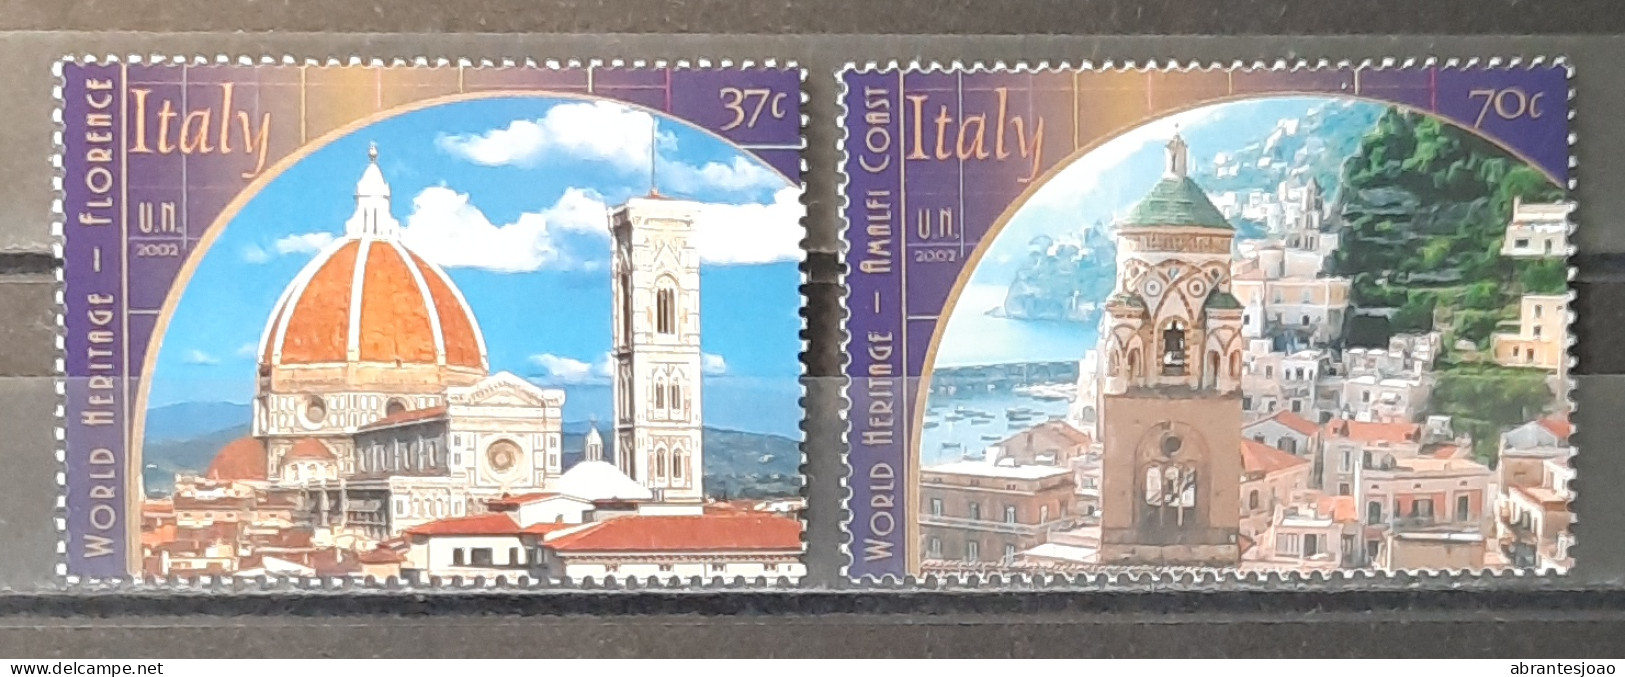 2002 - United Nations New York - MNH - Italy World Heritage - 2 Stamps - Nuevos